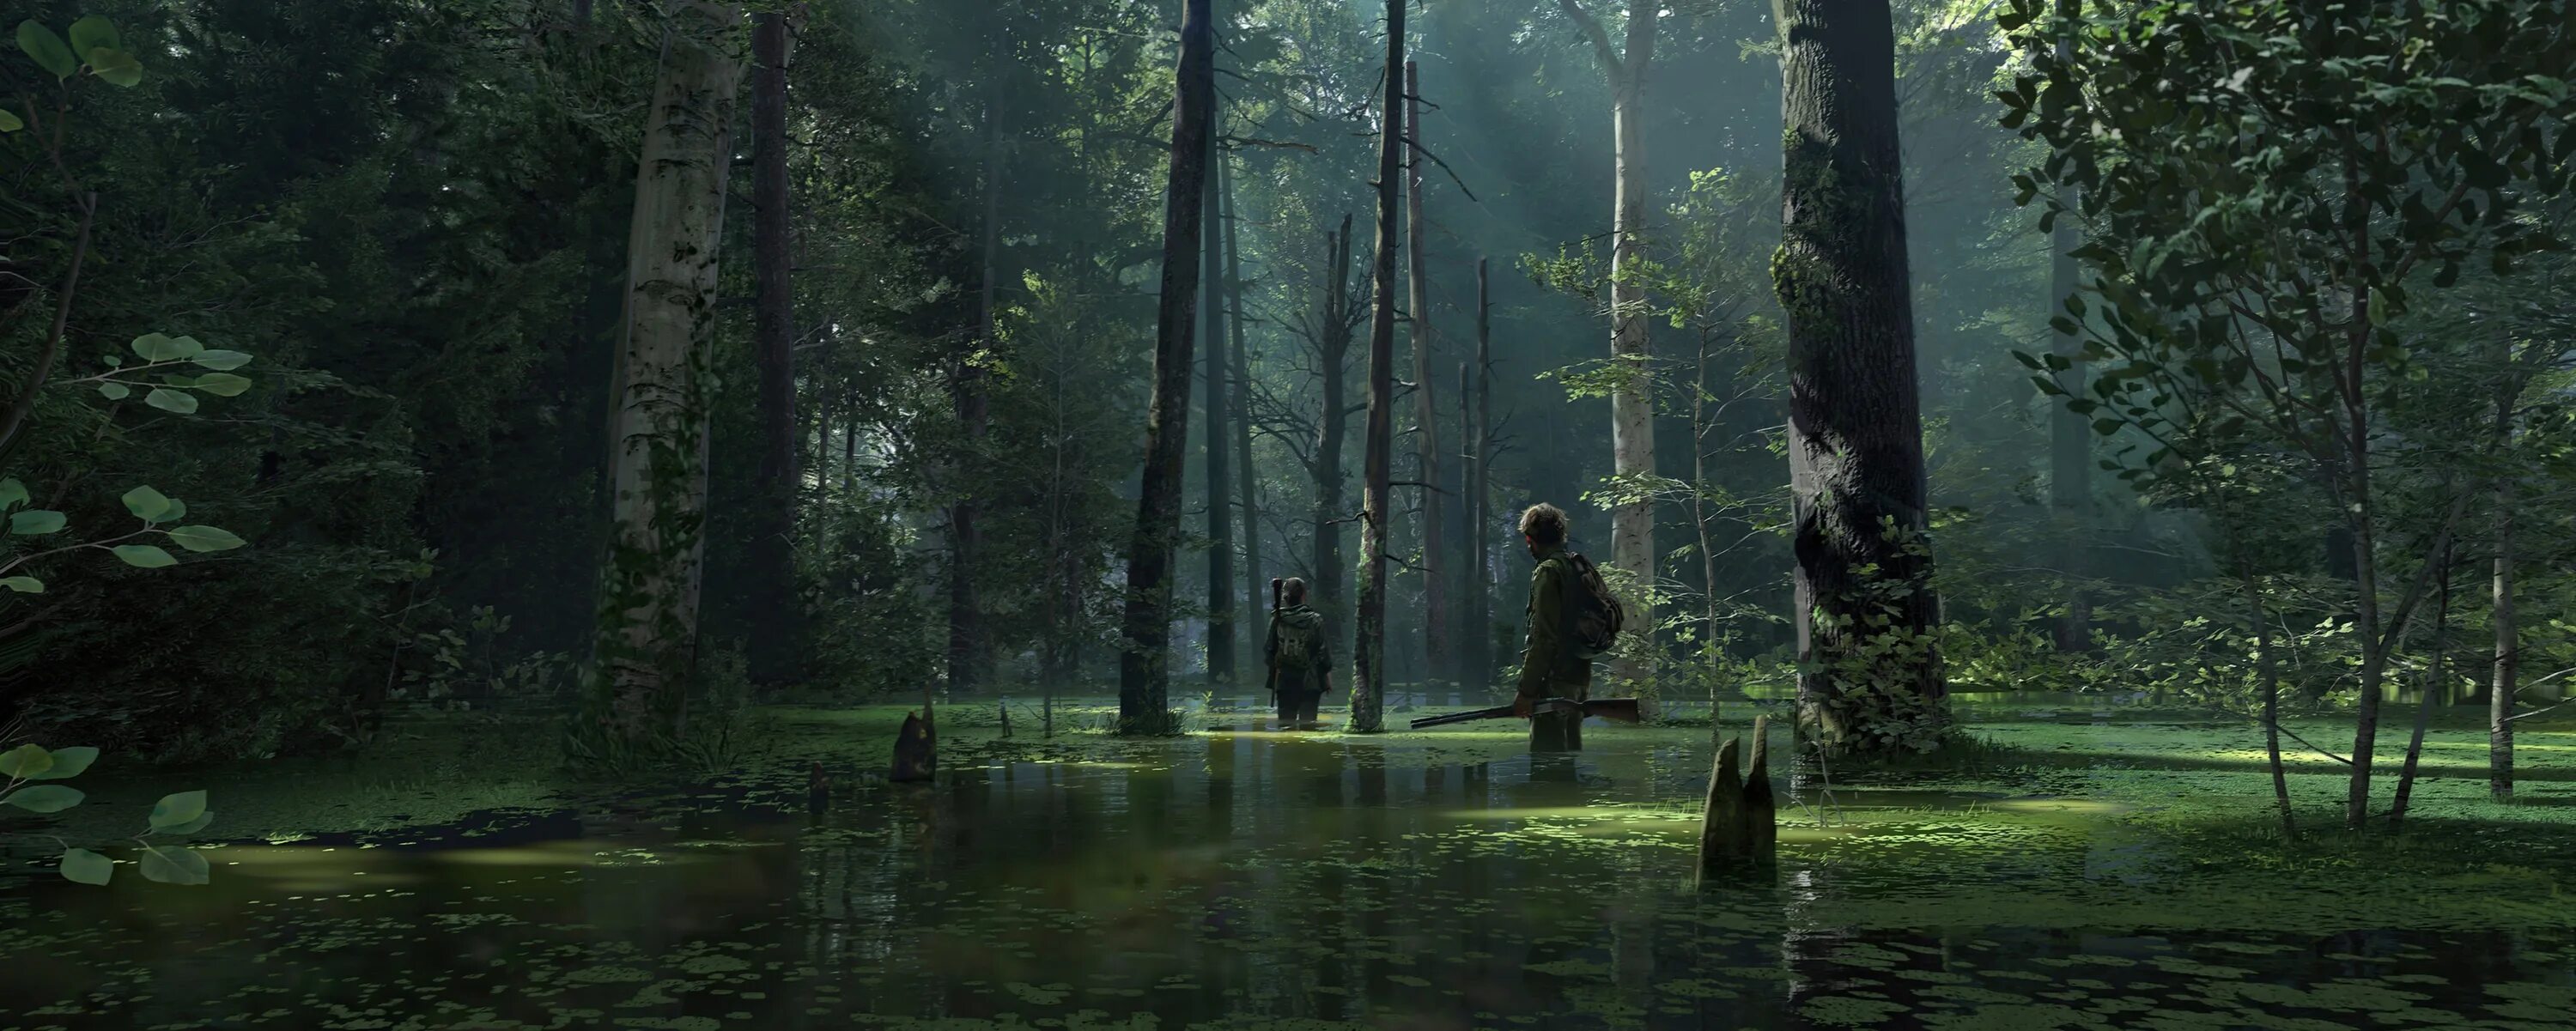 Forest 2 c. The last of us 2 Forest. Концепт арт the last of us Part 2.